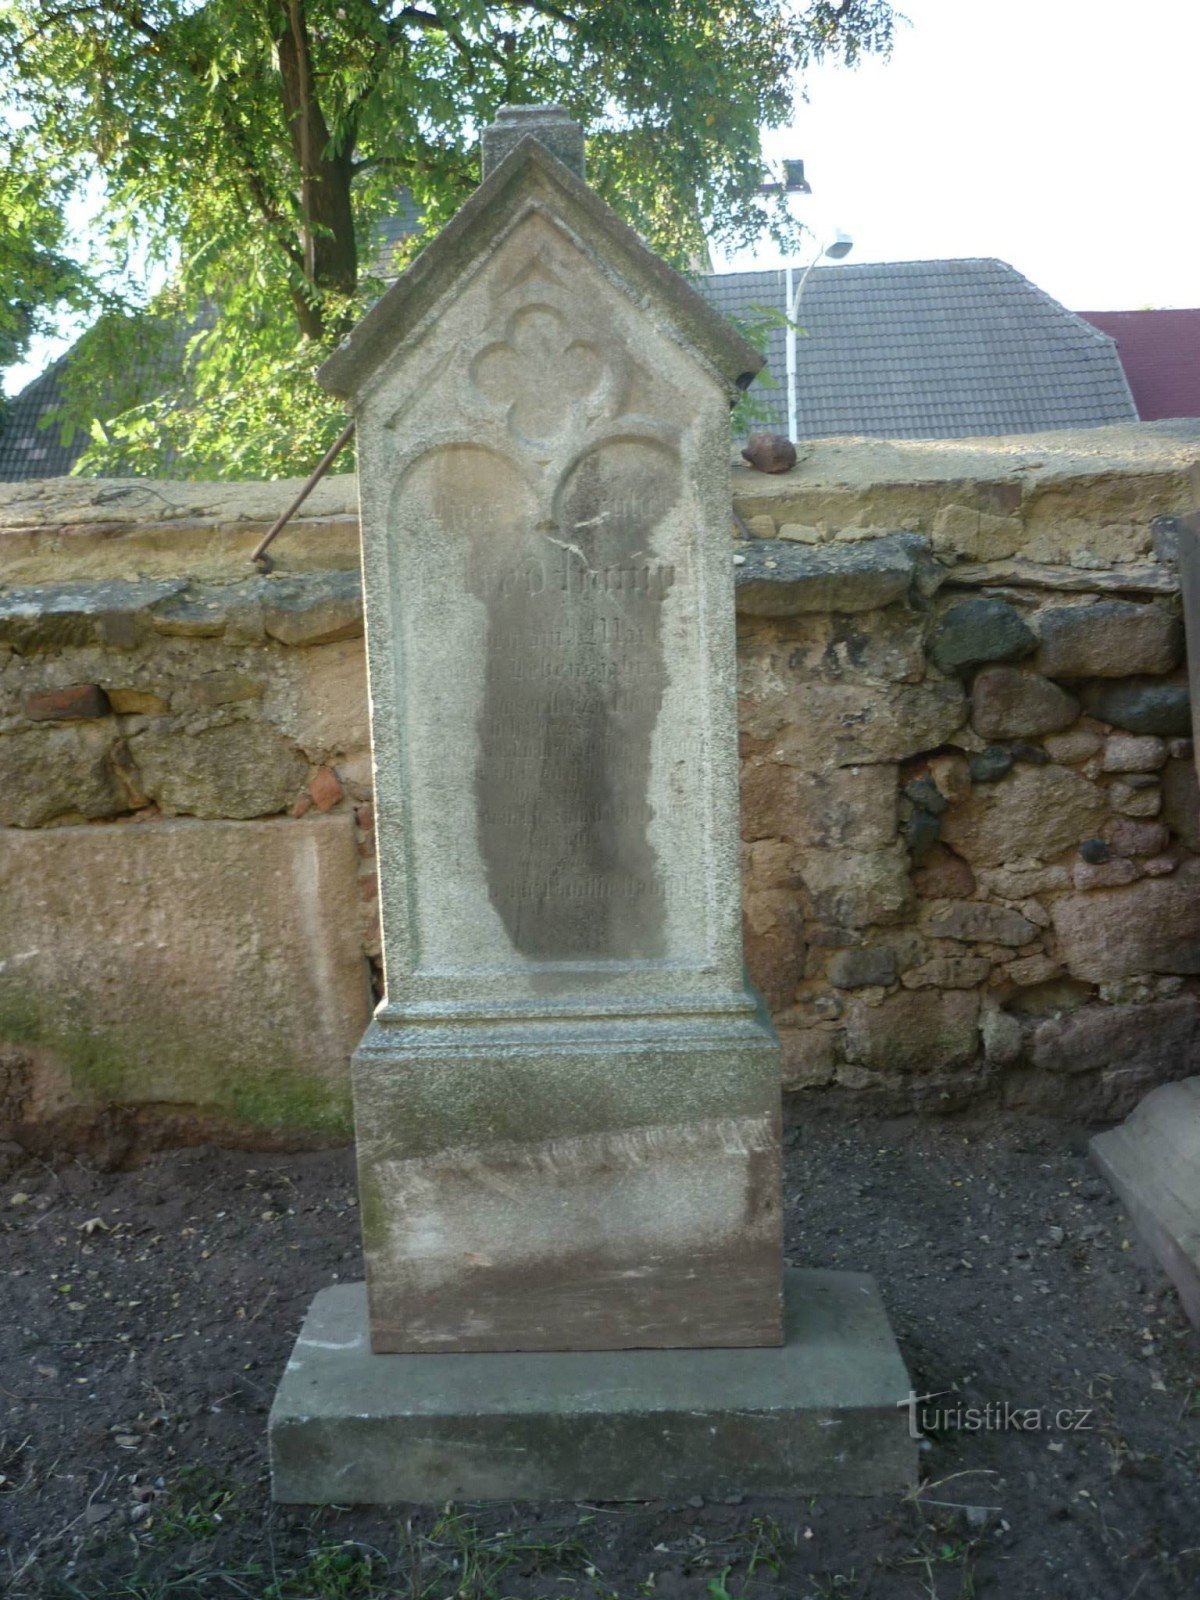 One of the restored tombstones in the adjacent cemetery